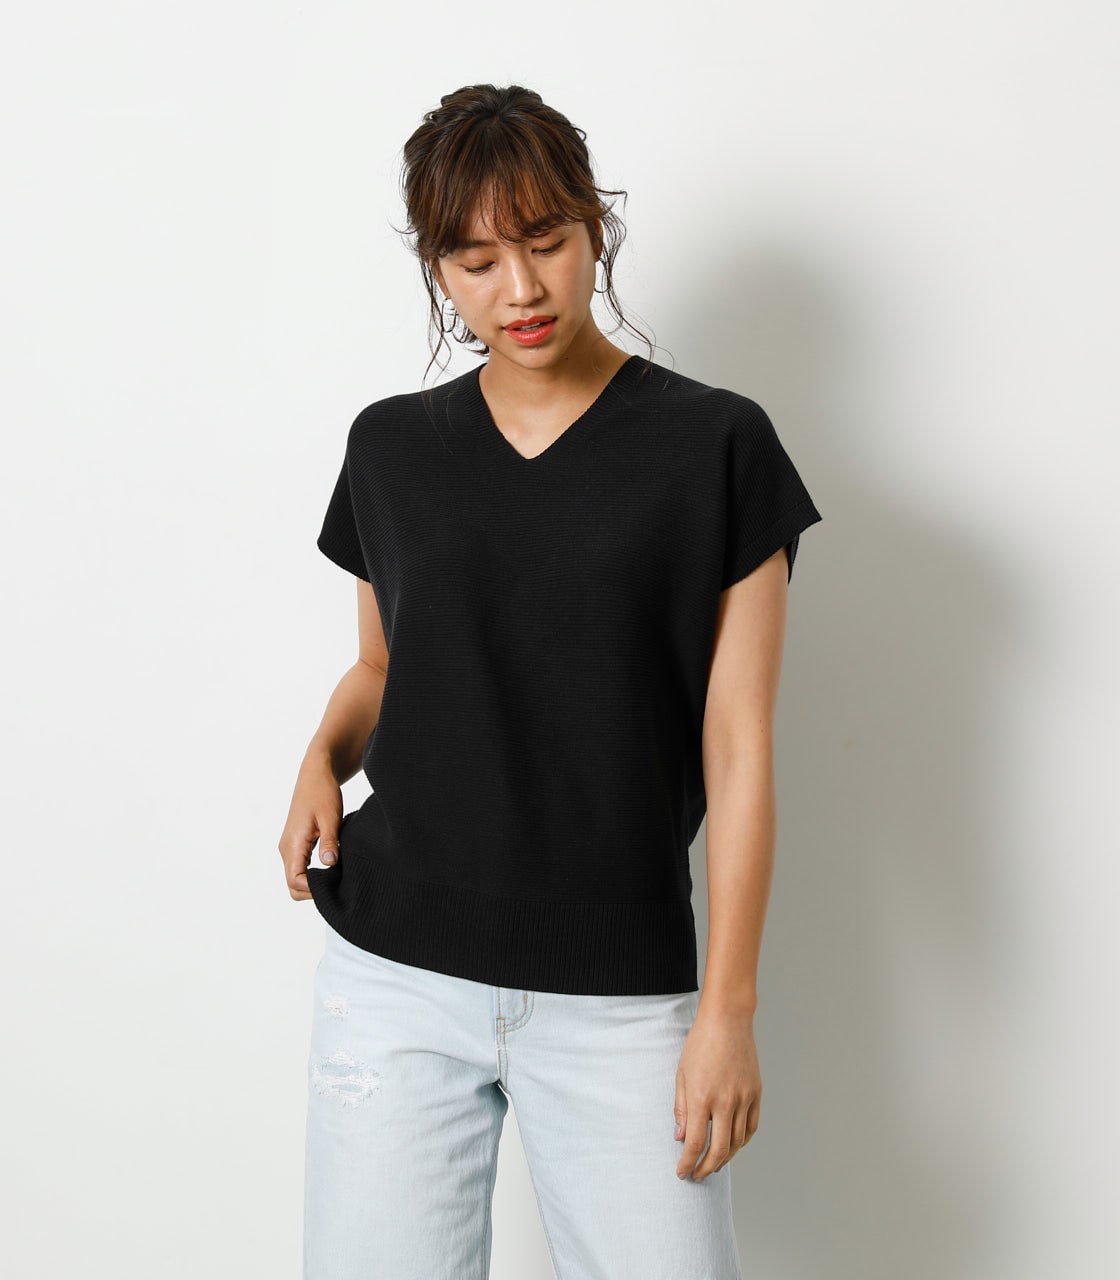 LOOSE PANEL KNIT TOP/ルーズパネルニットトップ 詳細画像 BLK 1